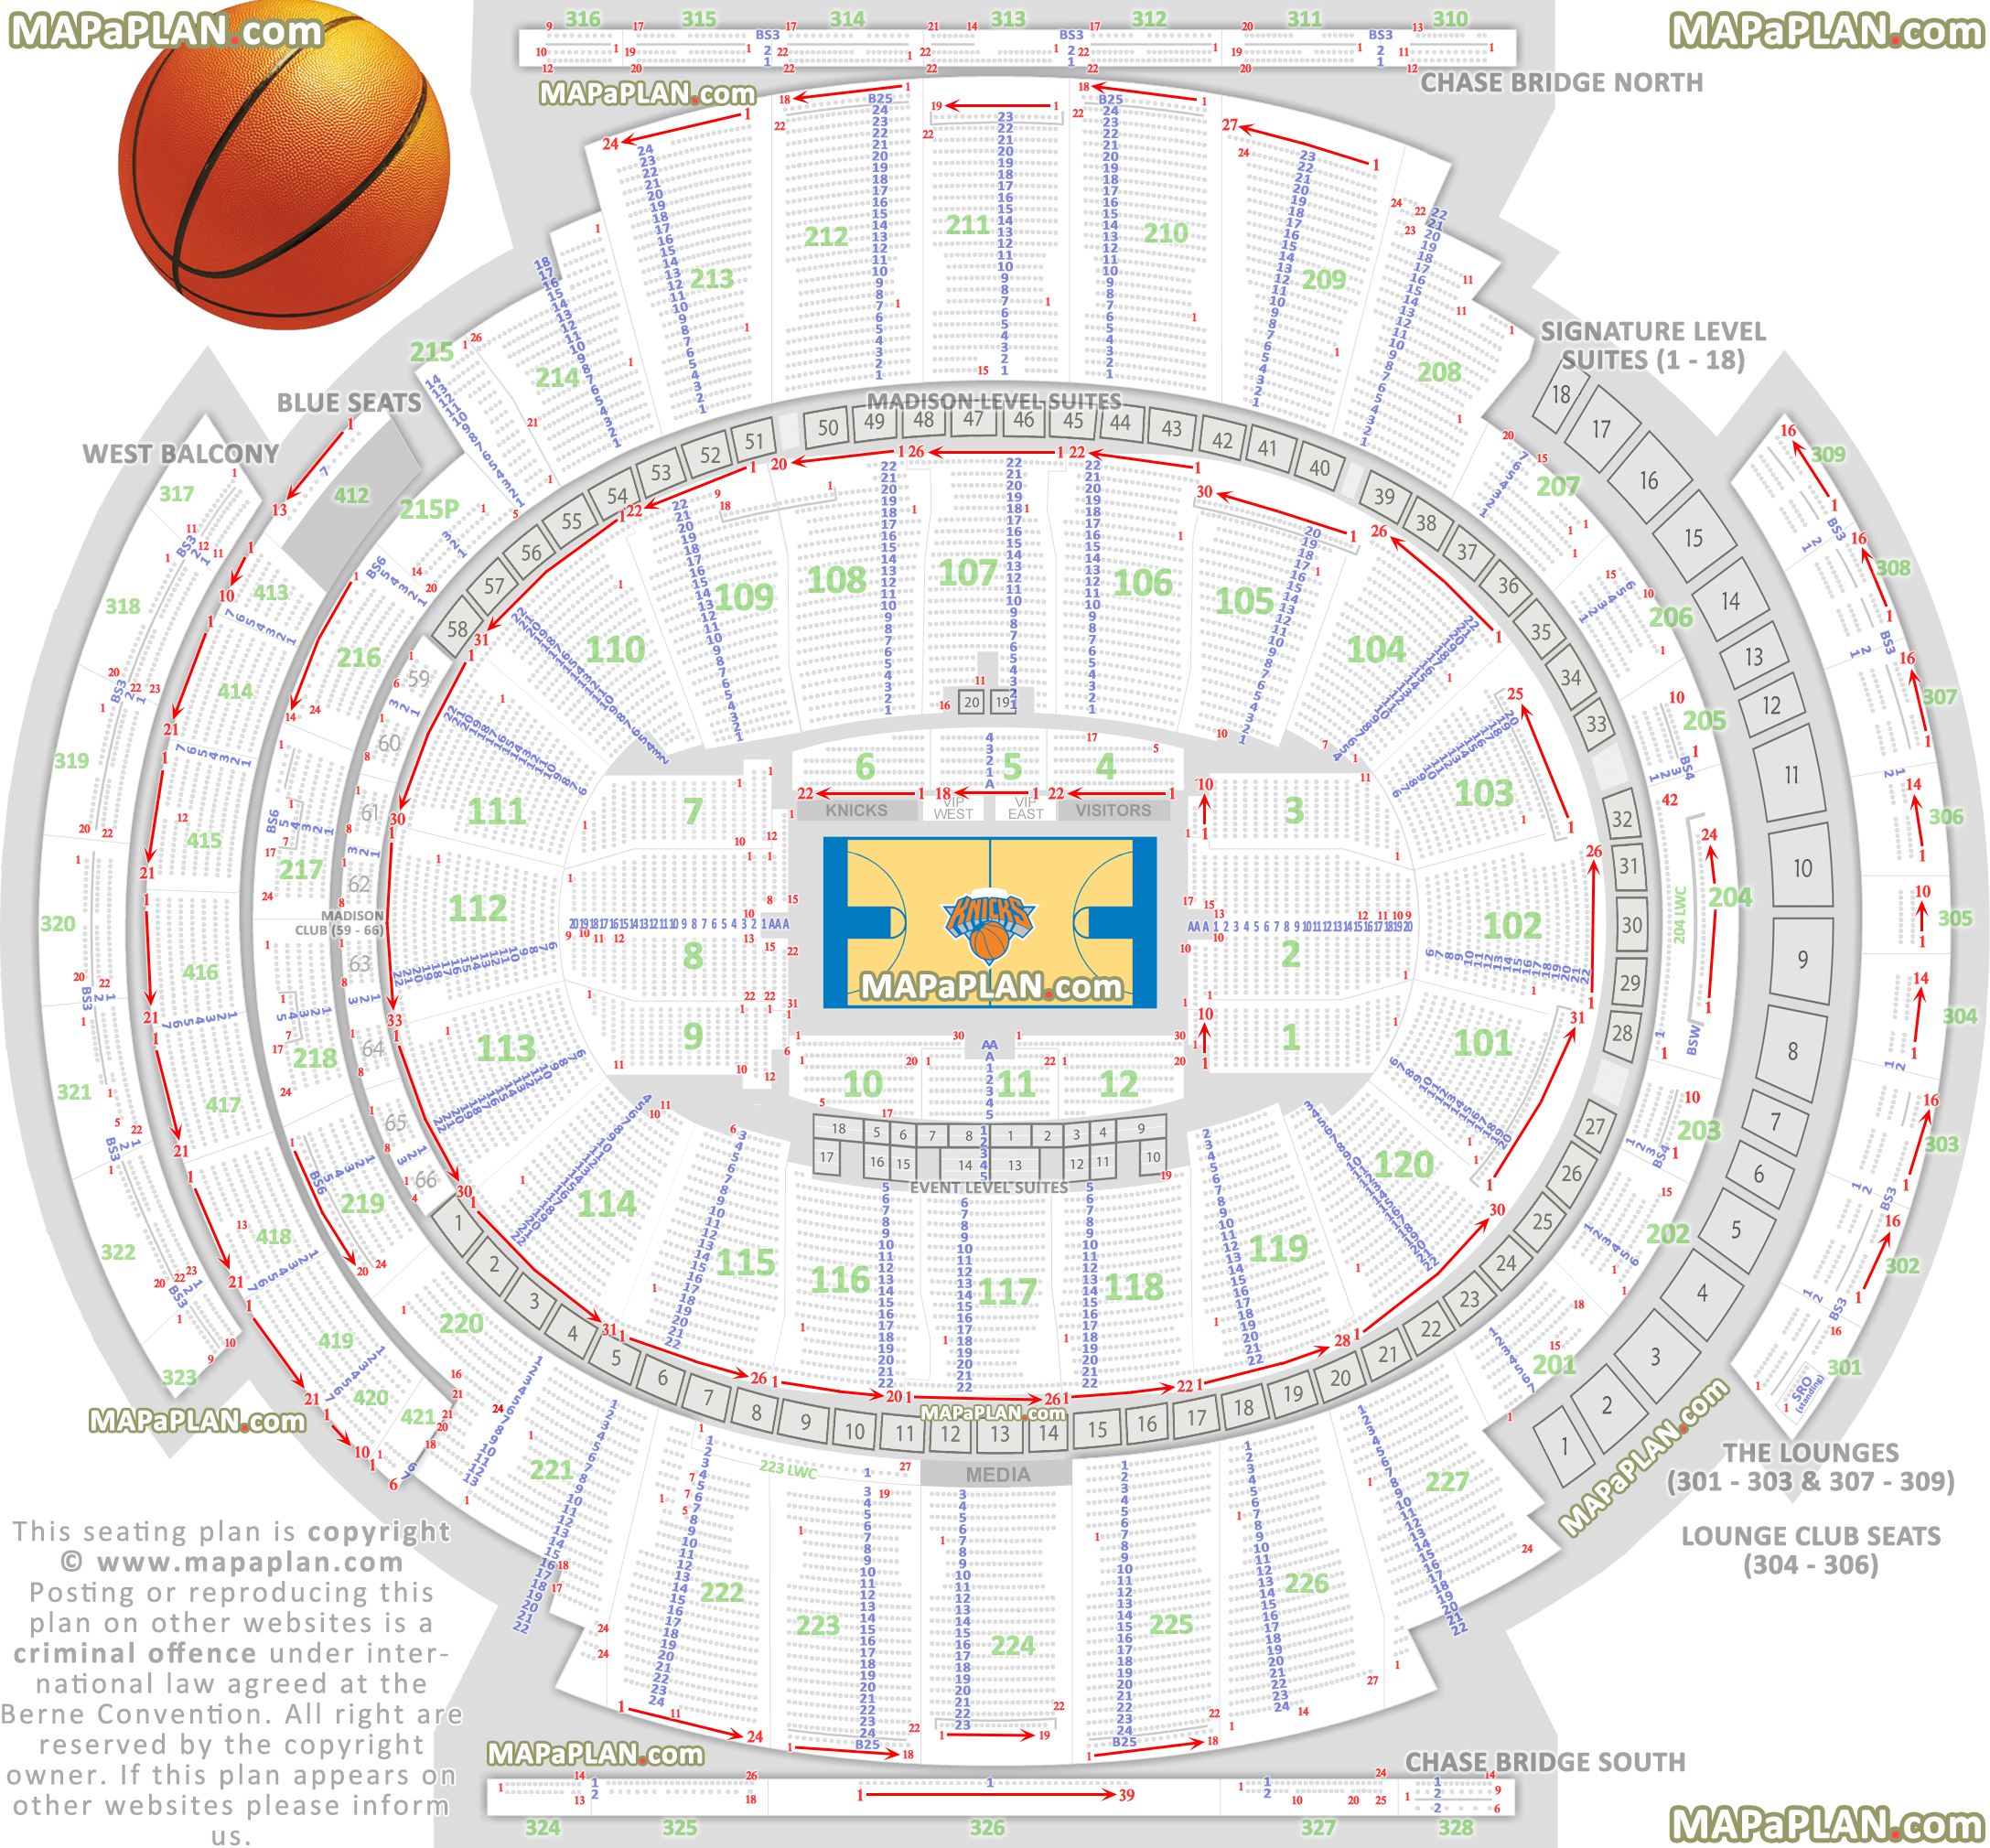 Madison square garden seating chart detailed seats rows and sections numbers knicks